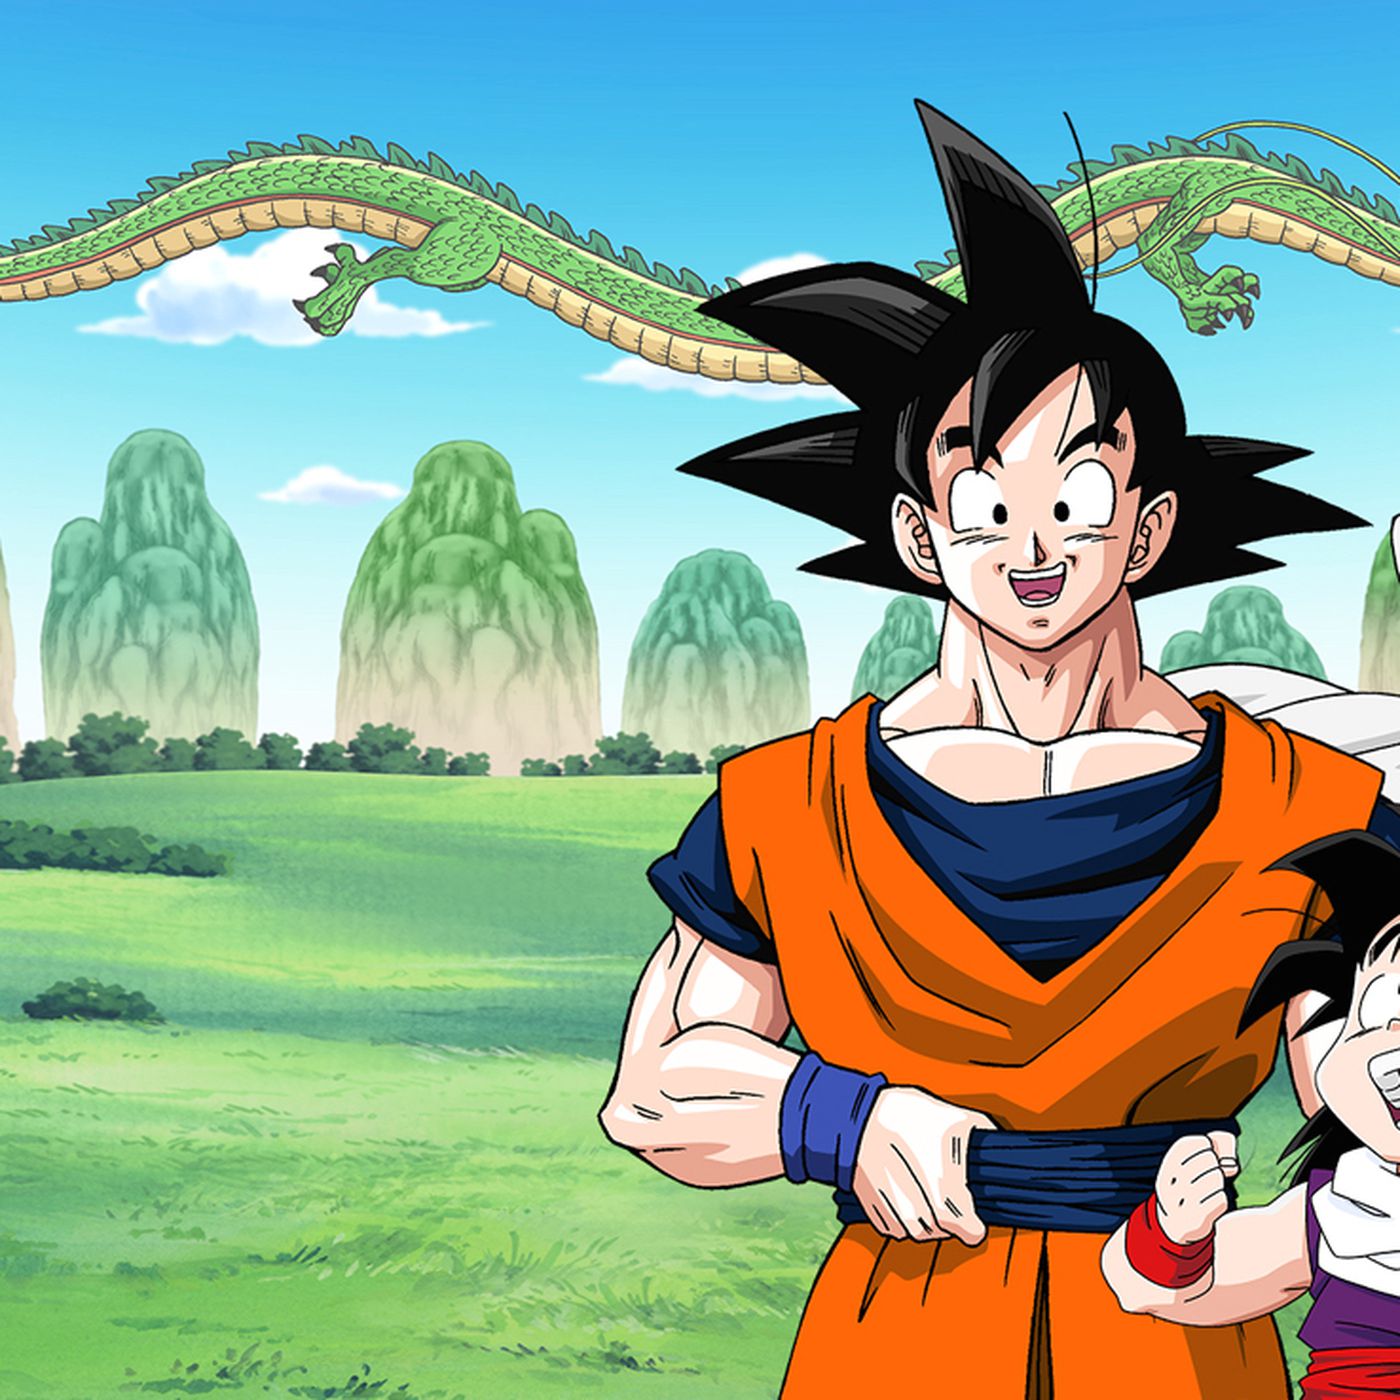 A Dragon Ball Z composer was elected the Texas State Legislature